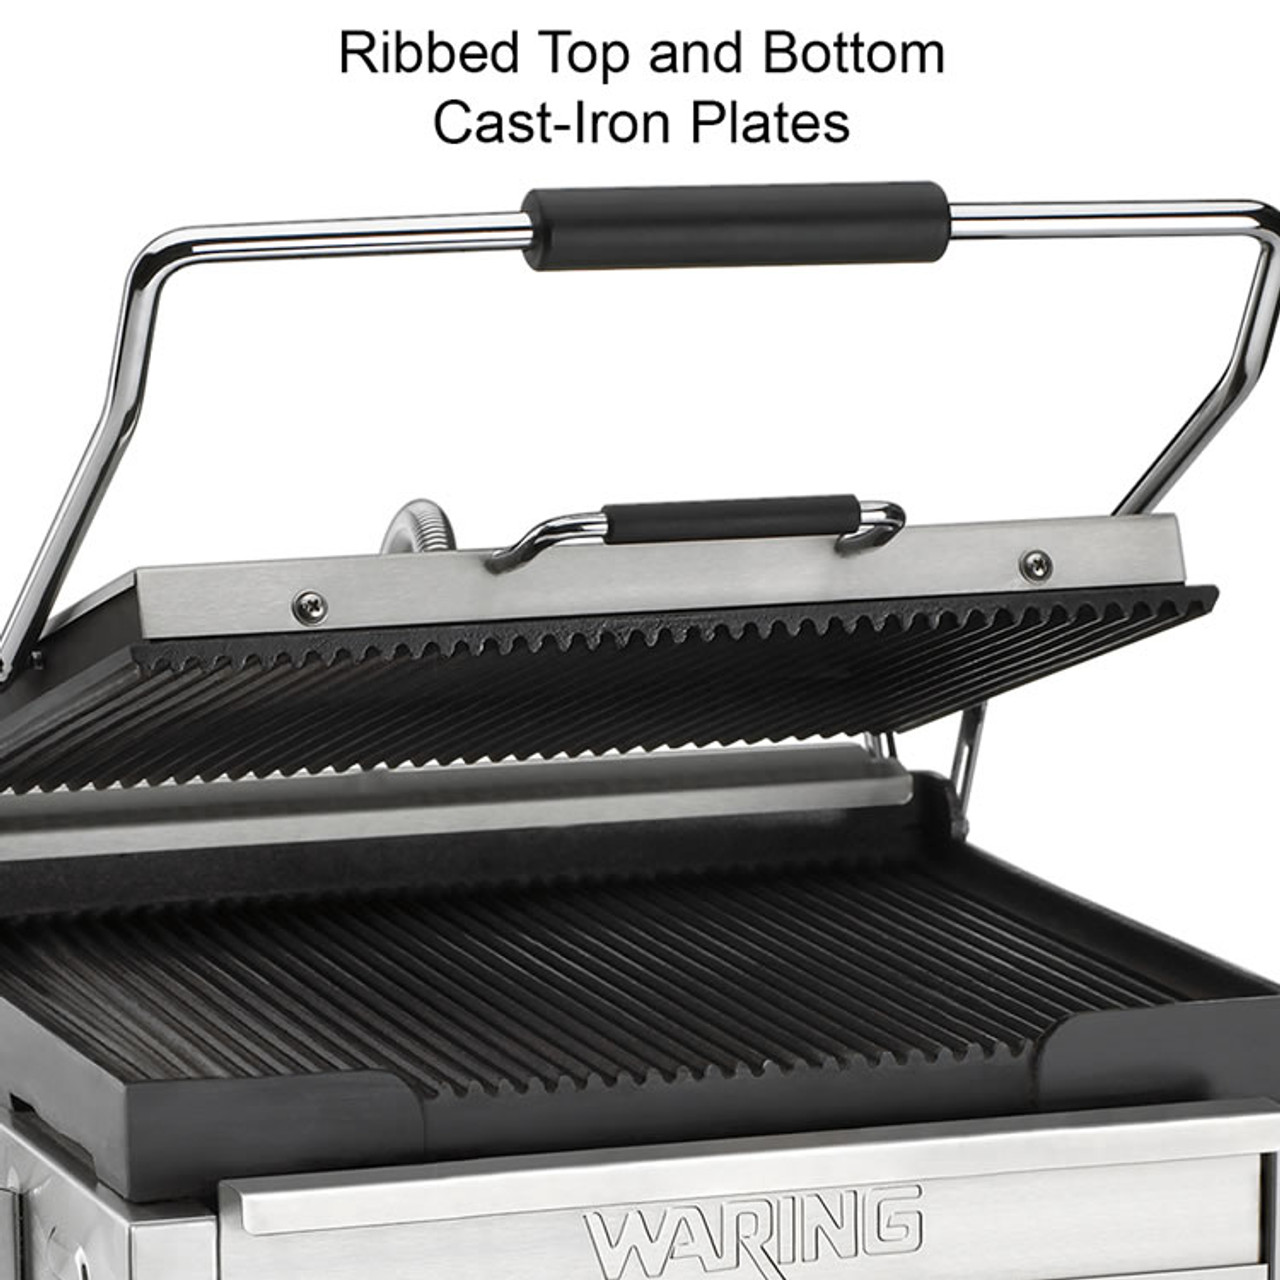 Waring Commercial WPG150 Compact Italian-Style Panini Grill, 120-volt - 2